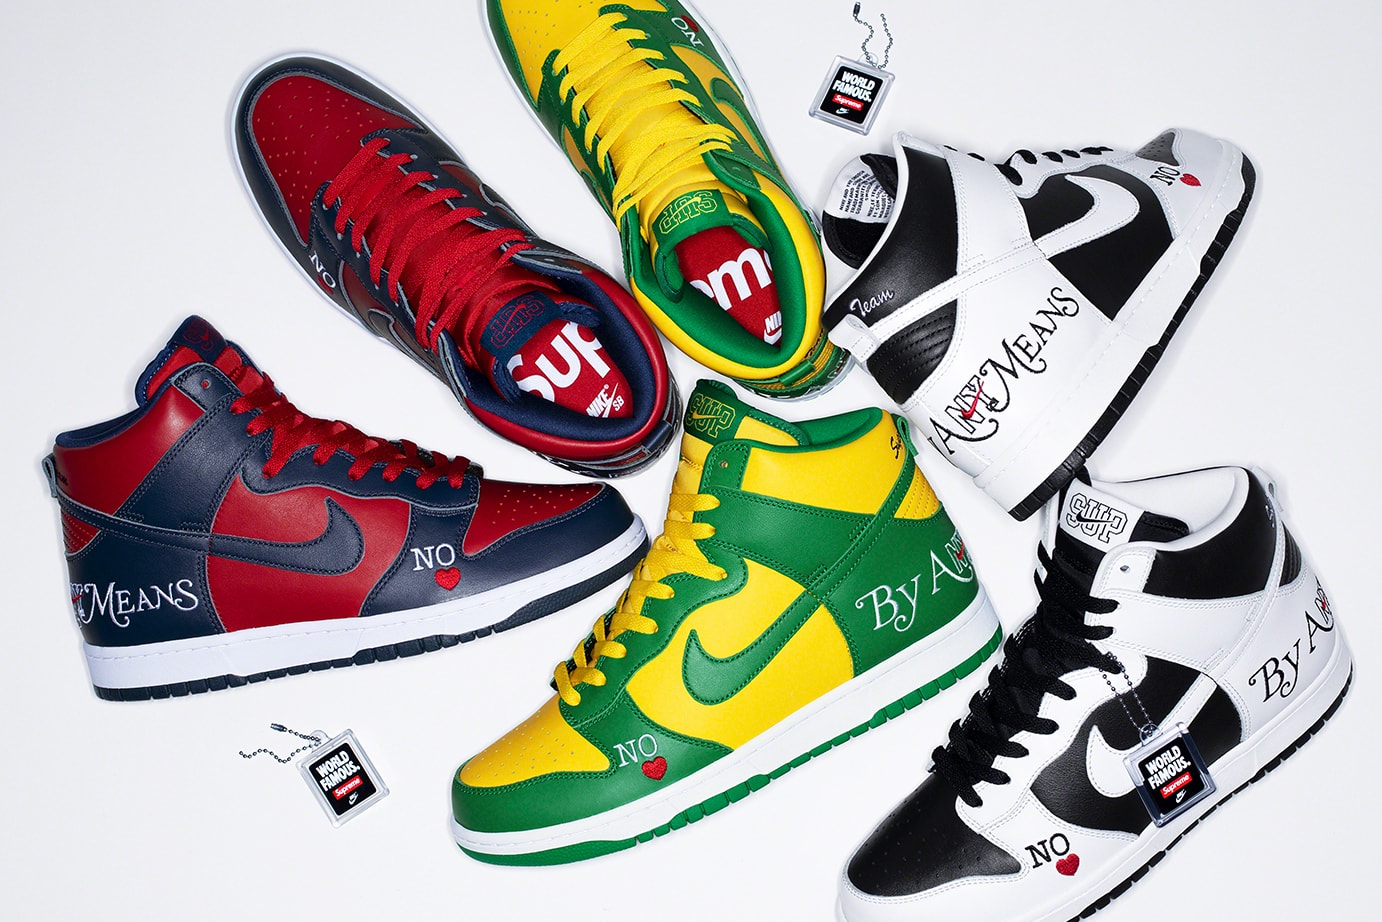 Supreme Nike SB Dunk High Spring Summer 2022 Collab Release Info Date Buy Price By Any Means Black White Varsity Red Navy Red Varsity Maize Pine Green